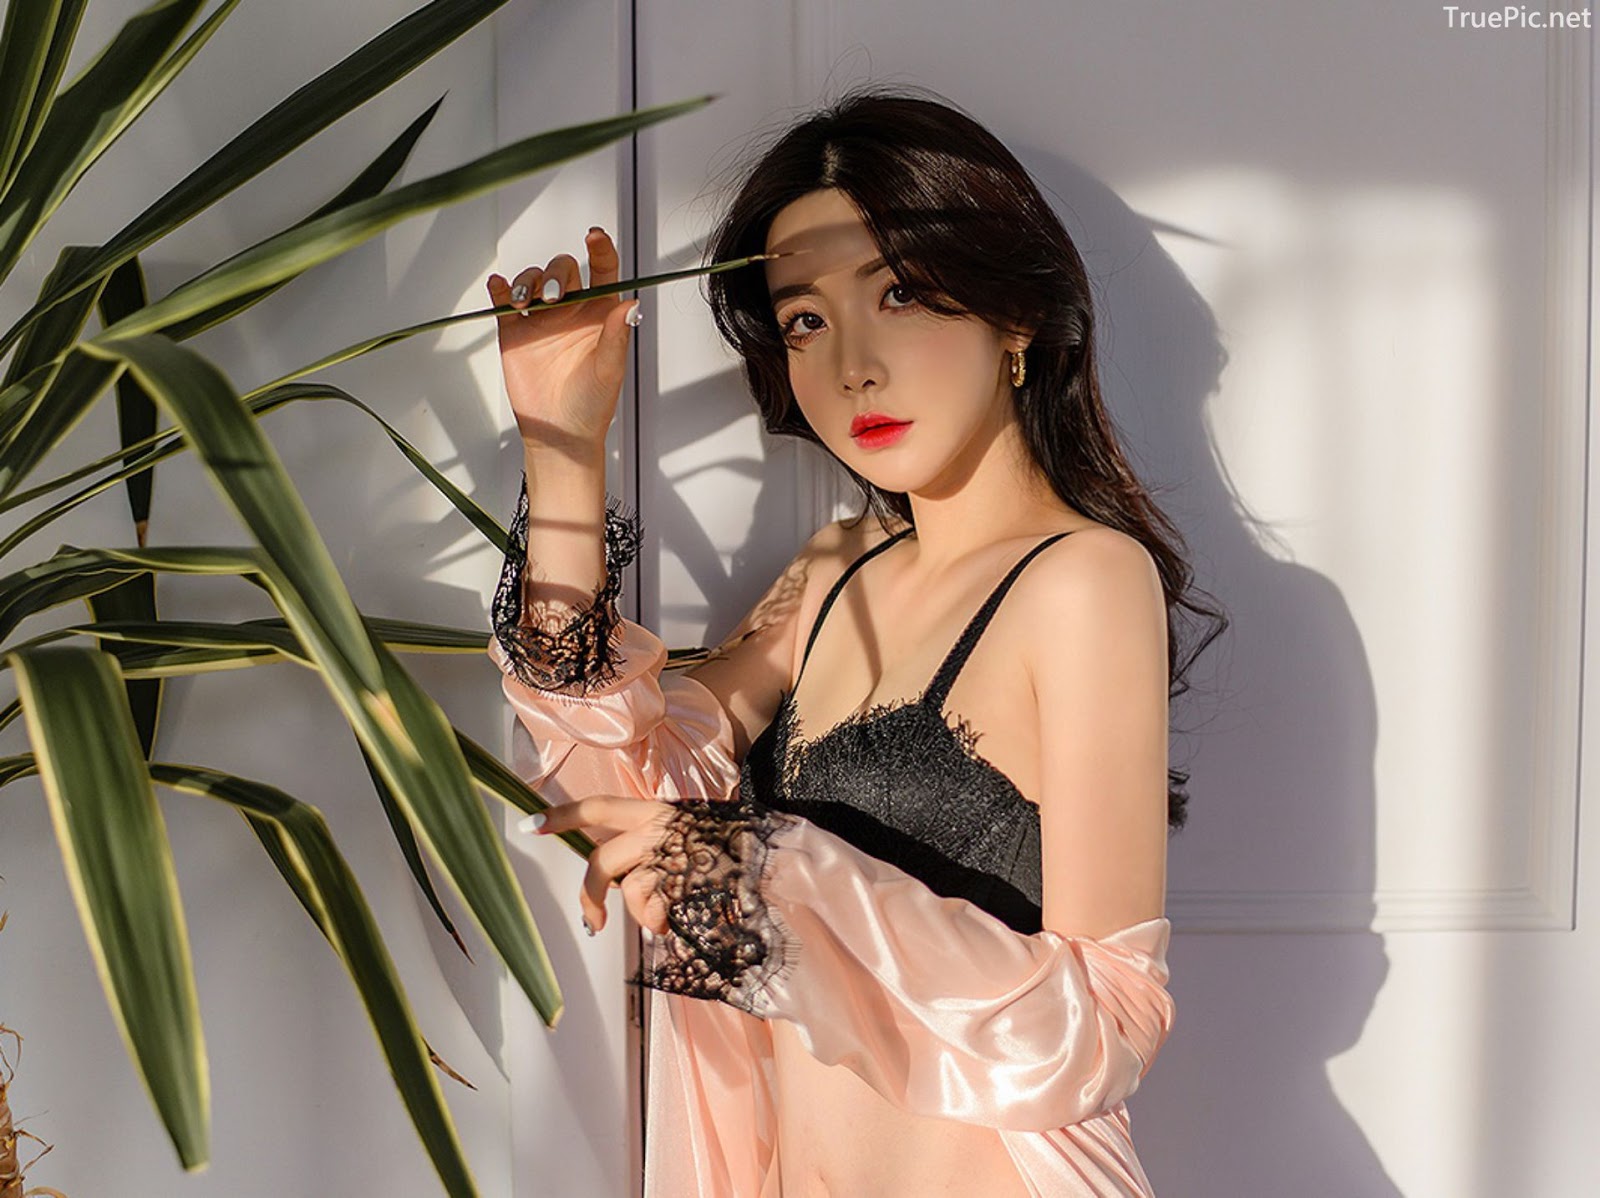 Korean model and fashion - Yoo Gyeong - Feminist Glossy Robe and Black Lingerie set - Picture 10